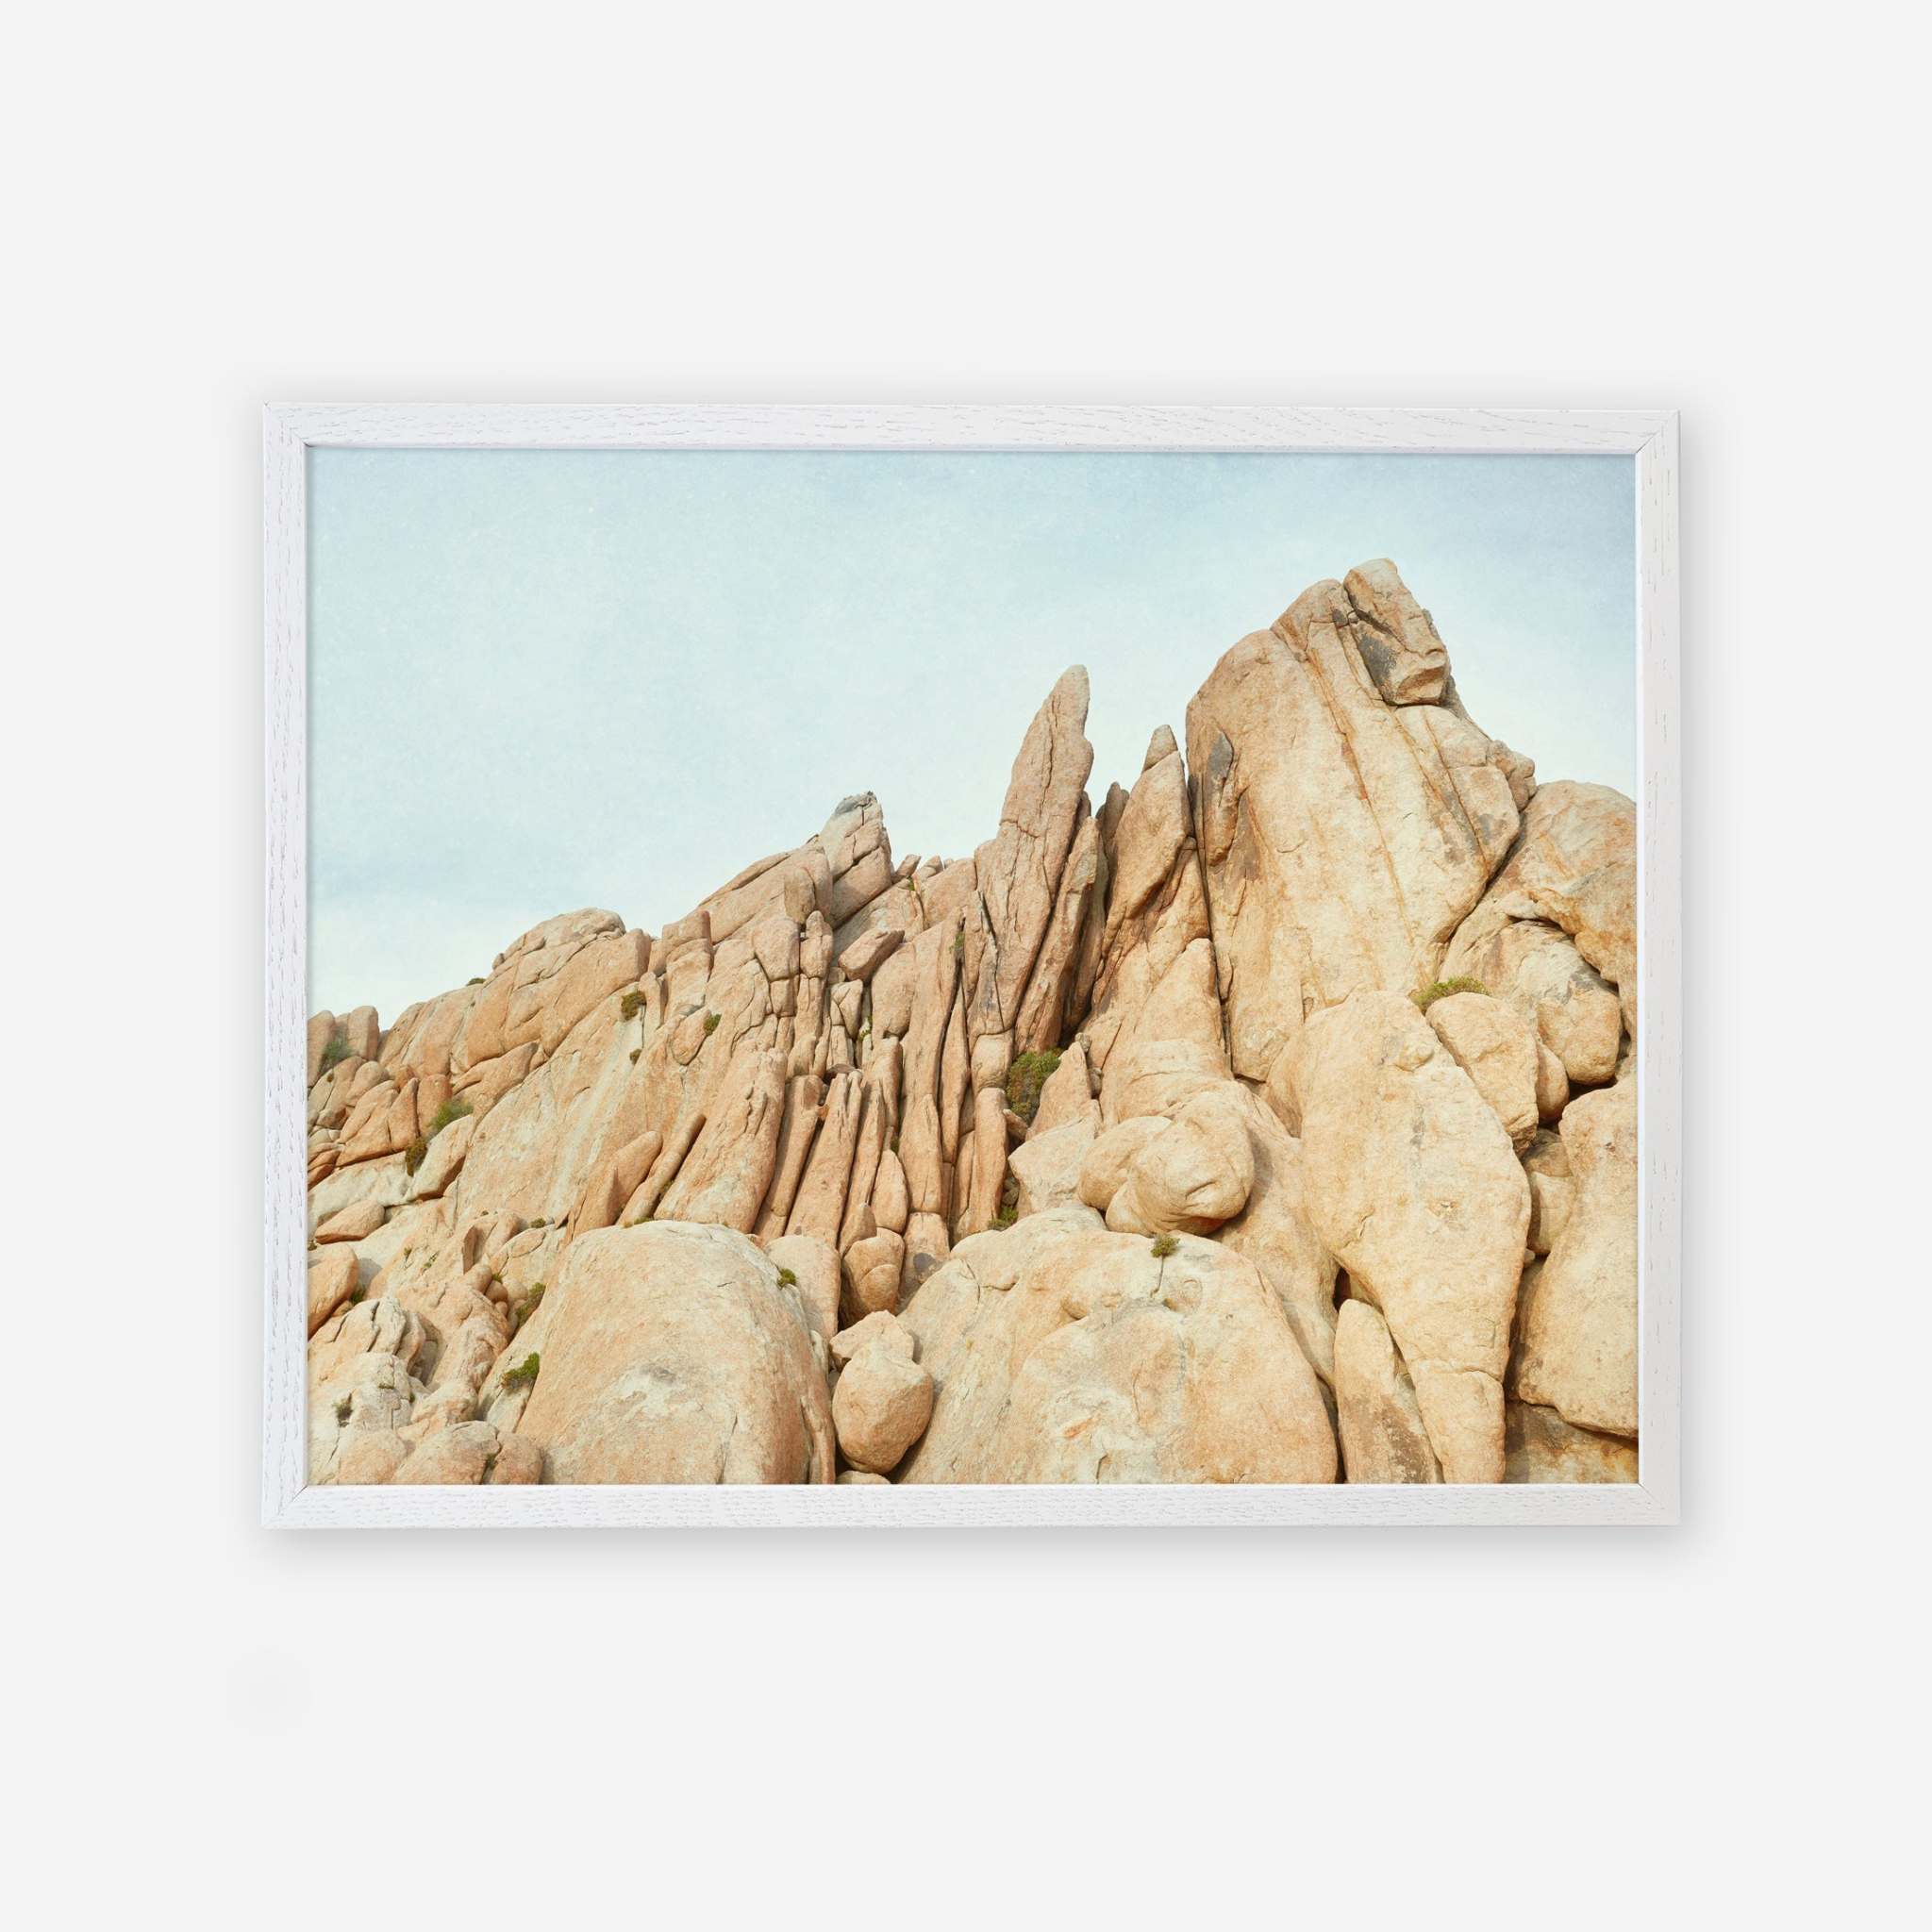 An unframed image of a rugged rock formation with sharp and rounded boulders extending towards a clear sky, depicted in a natural, earthy palette by Offley Green&#39;s Joshua Tree Print, &#39;Joshua Rocks.&#39;